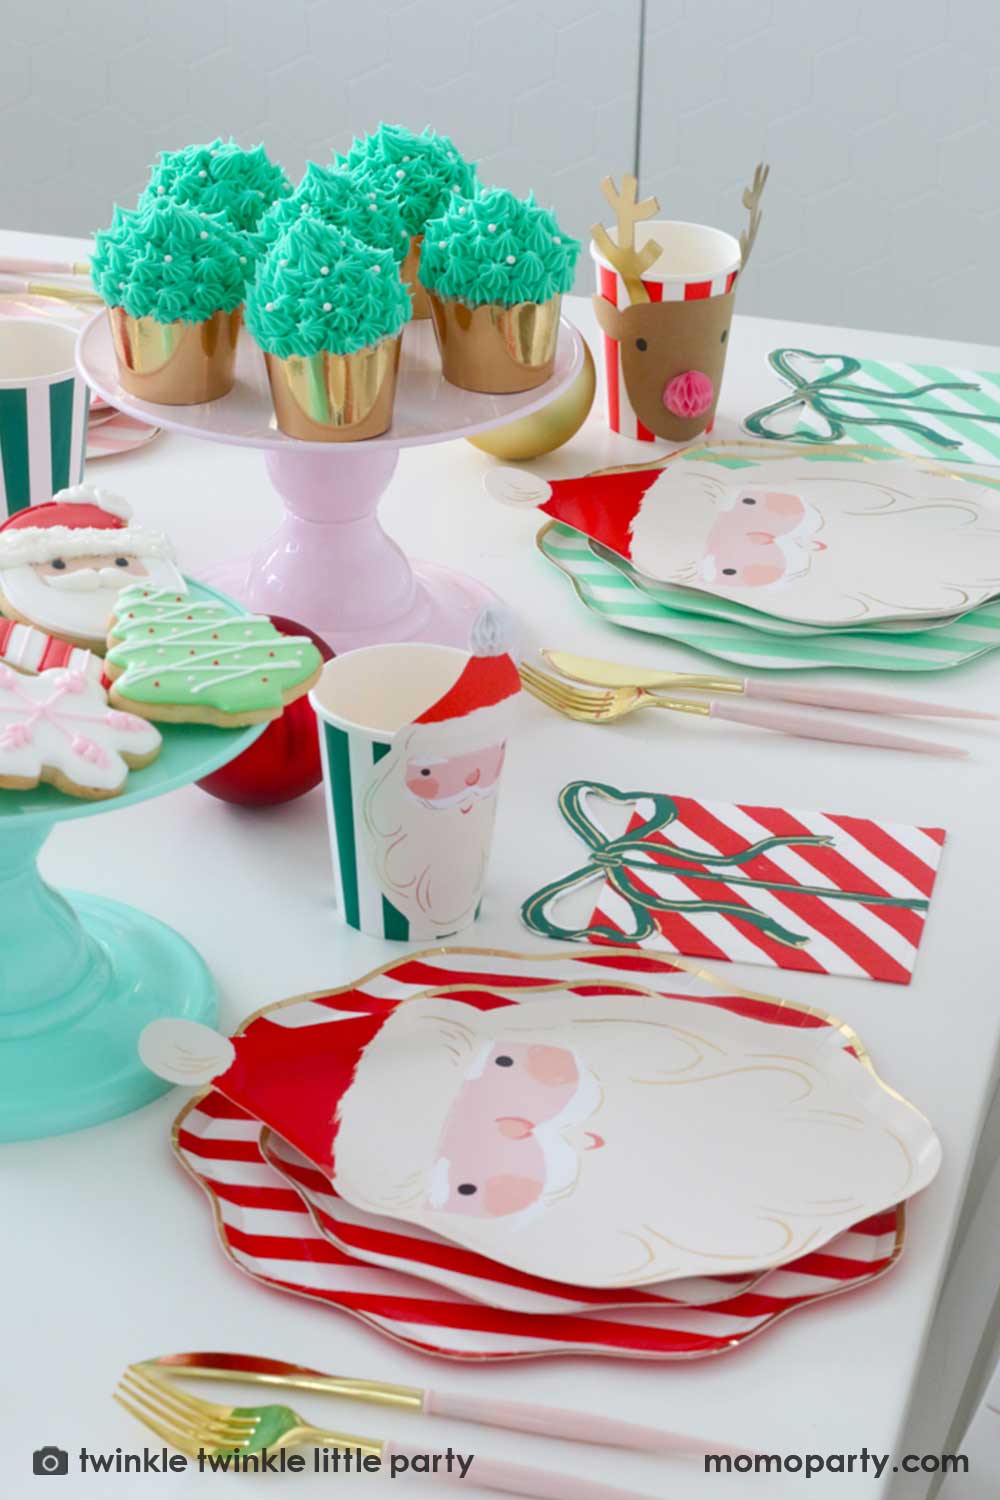 A festive Christmas party table featuring Momo Party's Festive striped dinner plates, side plates, Jolly Santa Plates, present with a bow napkins and Christmas honeycomb party cups by Meri Meri. On the center of the table are some buttercream Christmas tree cupcakes in festive gold foil baking cups and a mint cake topper with festive Holiday cookies in the design of a Santa, Christmas tree, candy cane and snowflake. Makes this a modern inspo for a festive Holiday table setting.